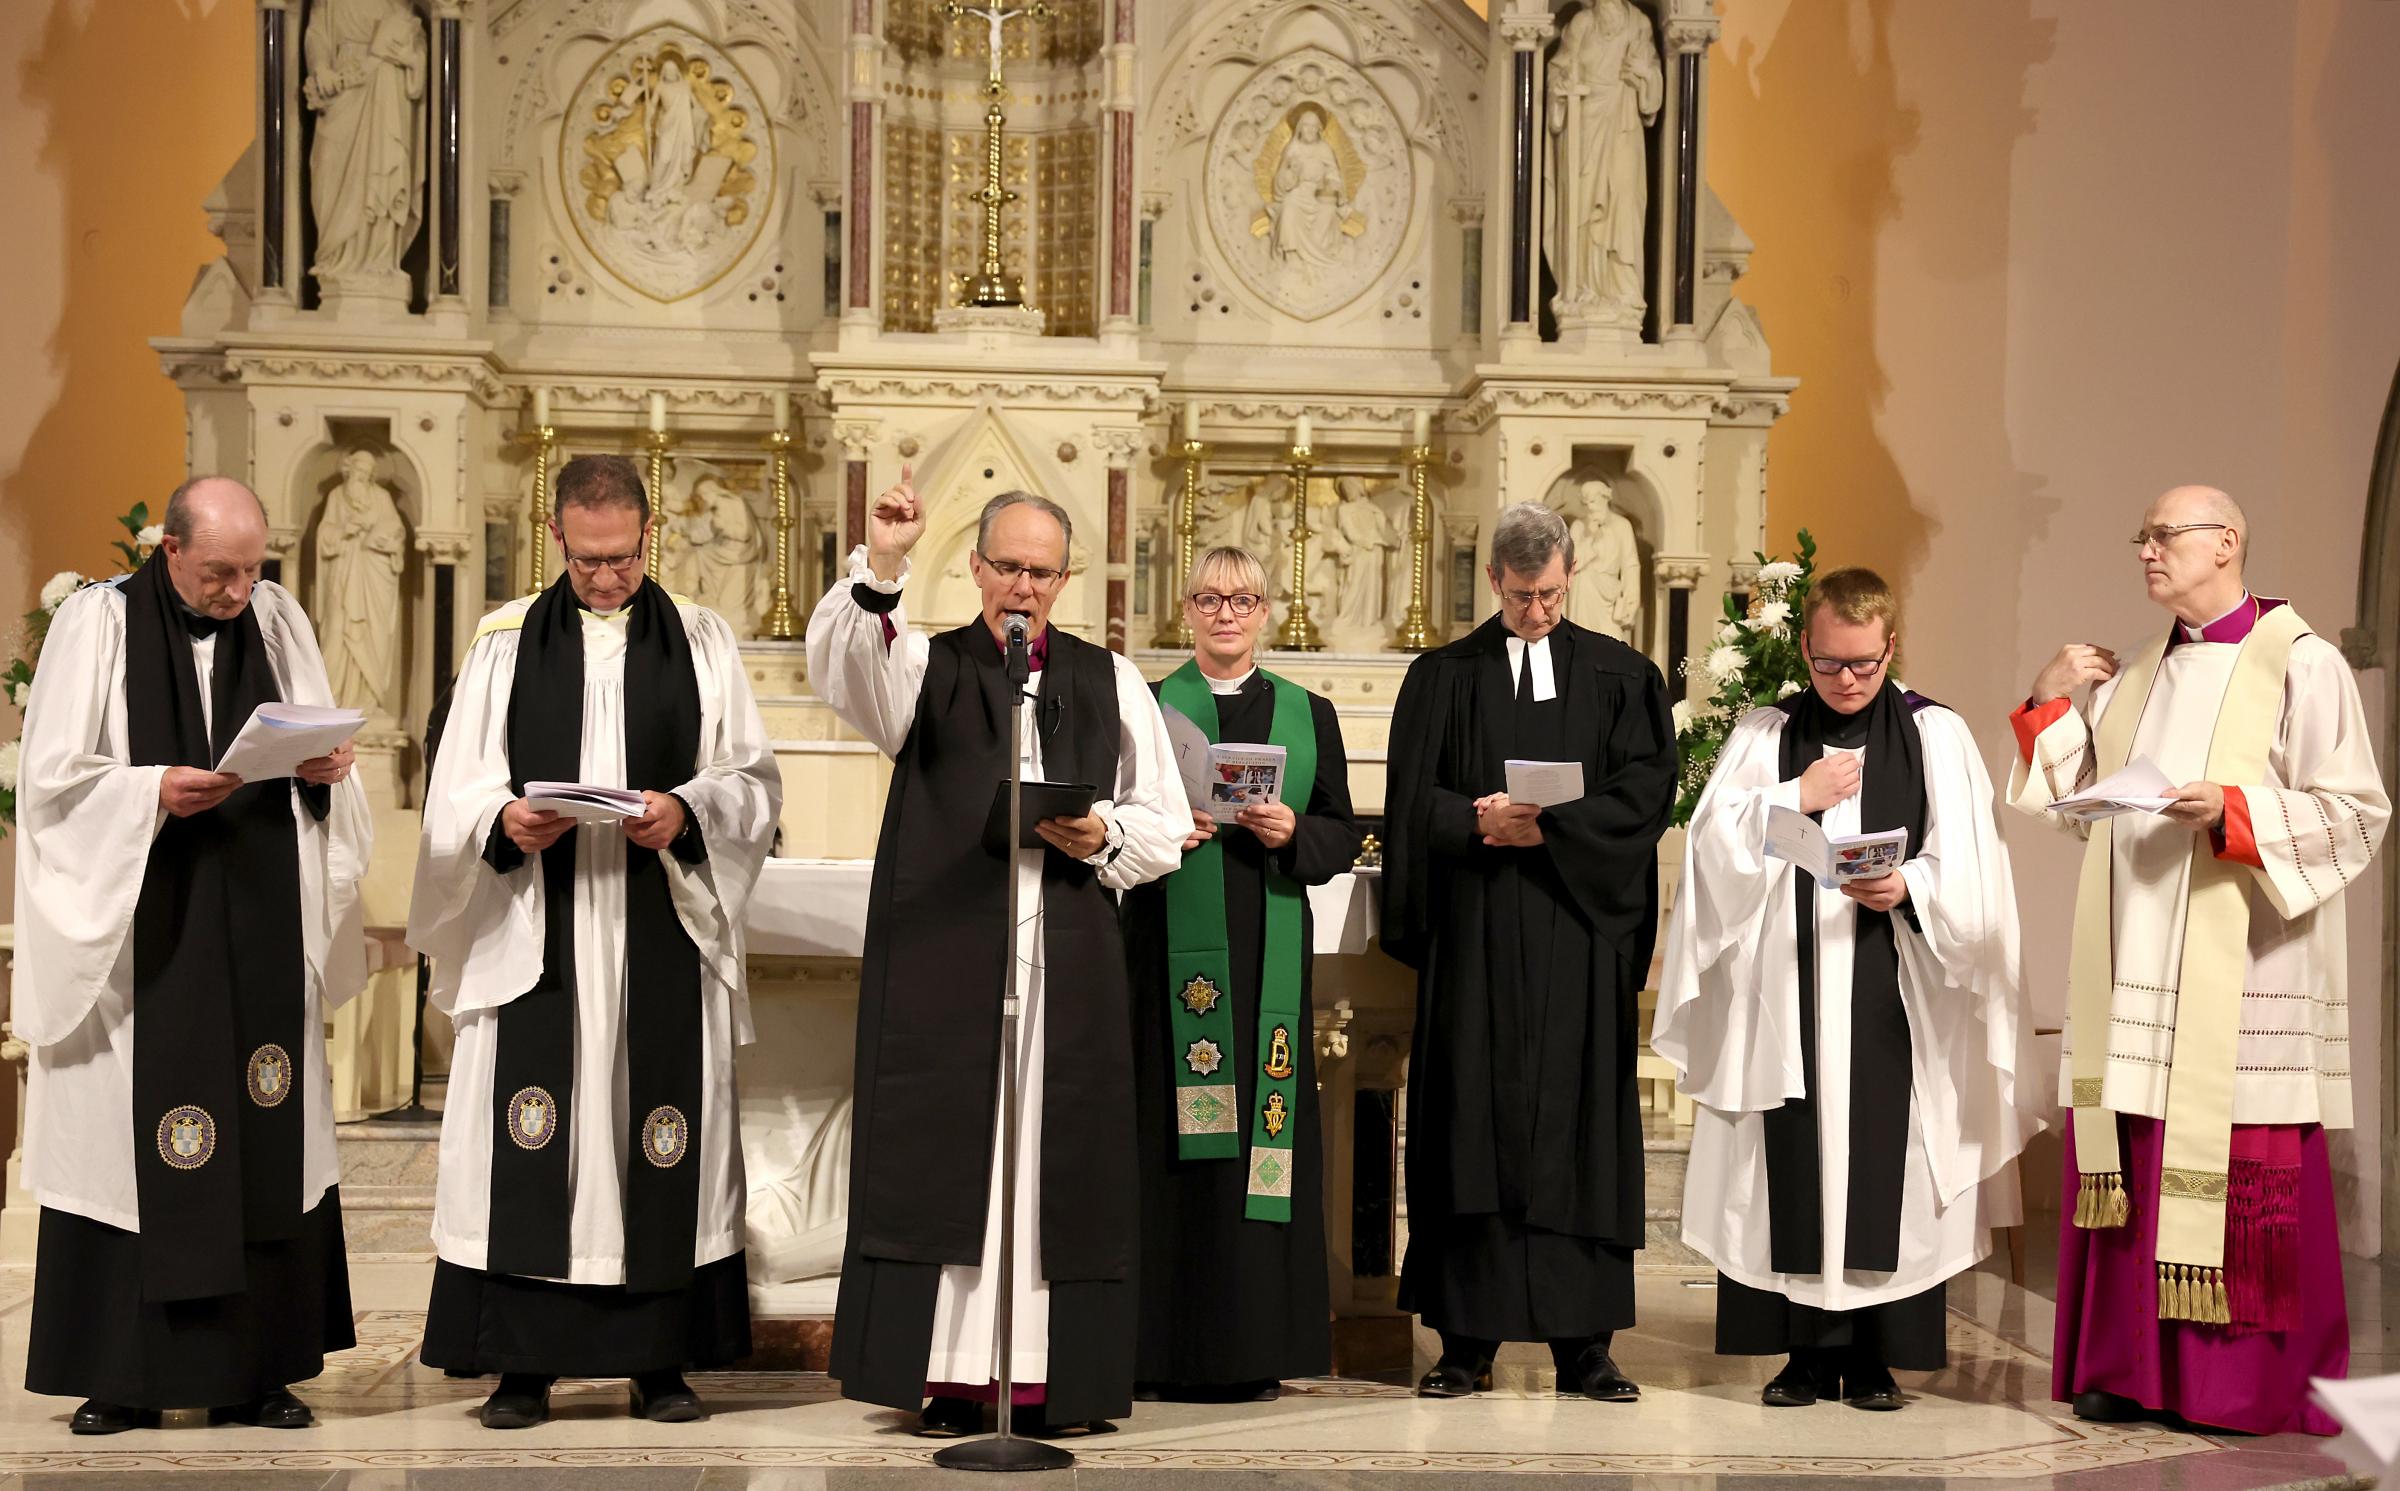 The Bishop of Clogher, the Right Rev. Dr. Ian Ellis (third left), performing the final blessing during the Service of Reflection and Thanksgiving for Her Majesty Queen Elizabeth II, in St. Michaels Church Enniskillen. Also included are Rev. Canon Noel